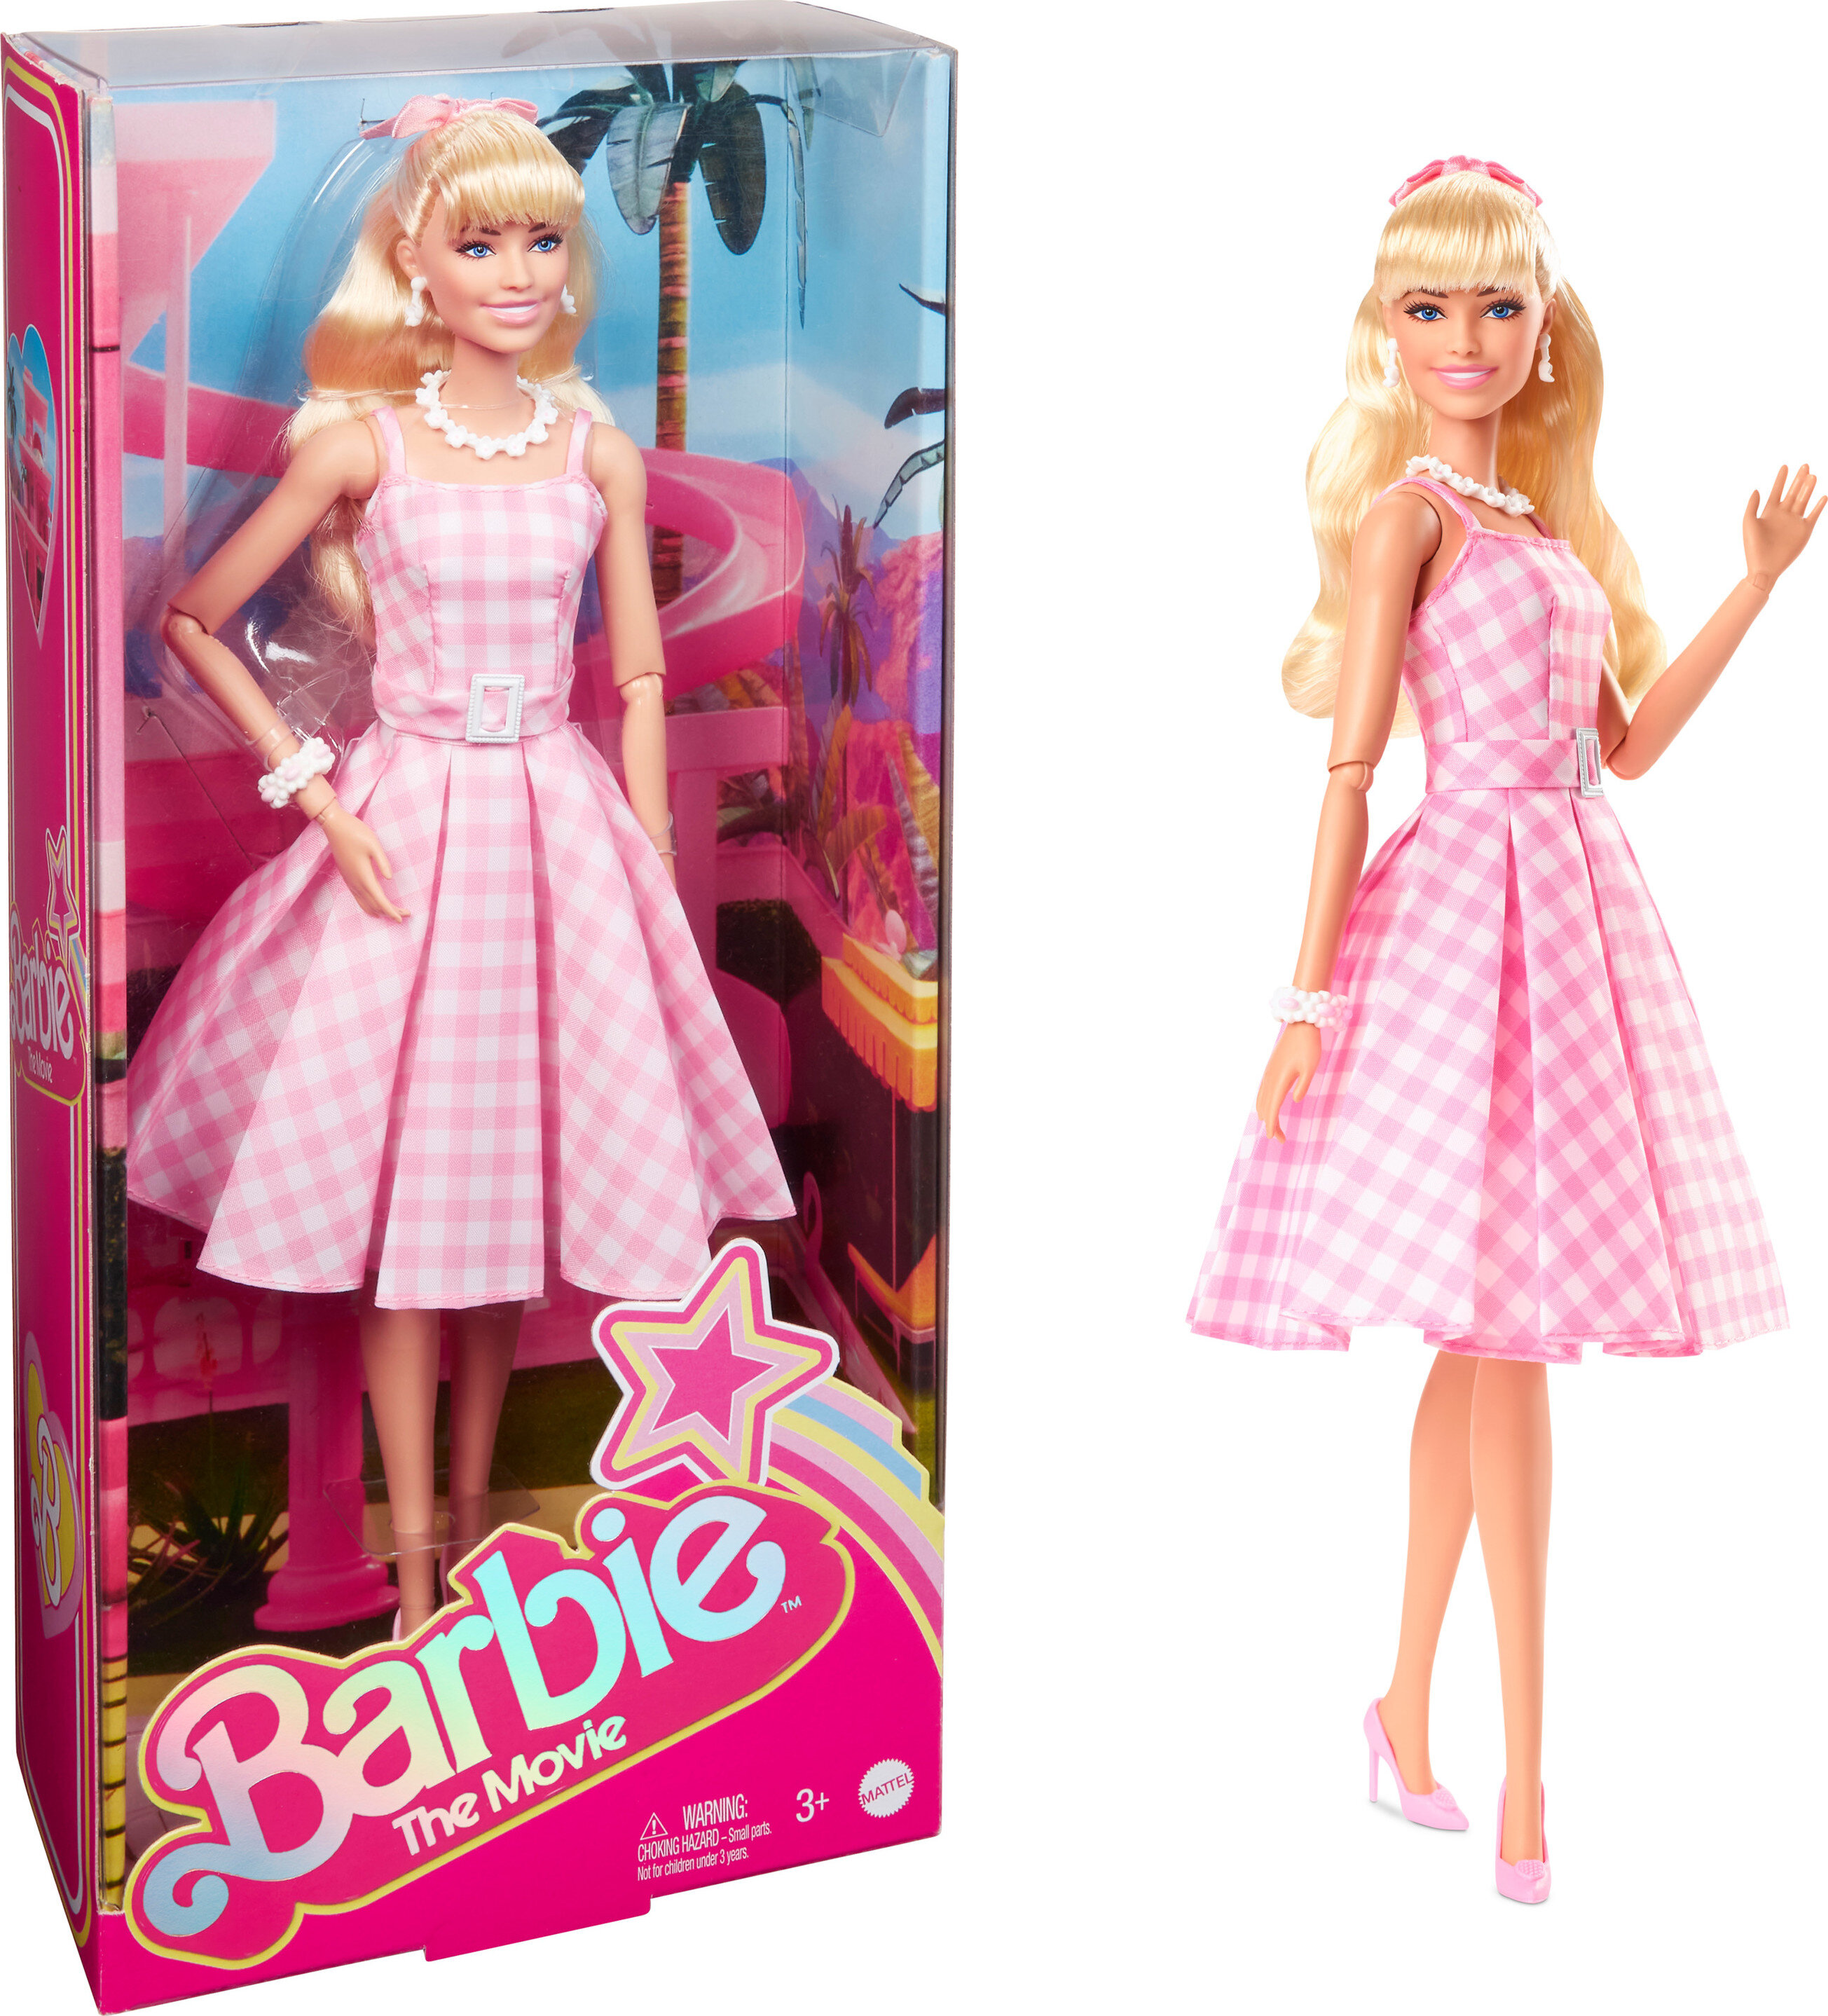 Barbie The Movie Collectible Doll, Margot Robbie as Barbie in Pink Gingham Dress, Toy for 3 Years and Up - image 1 of 8